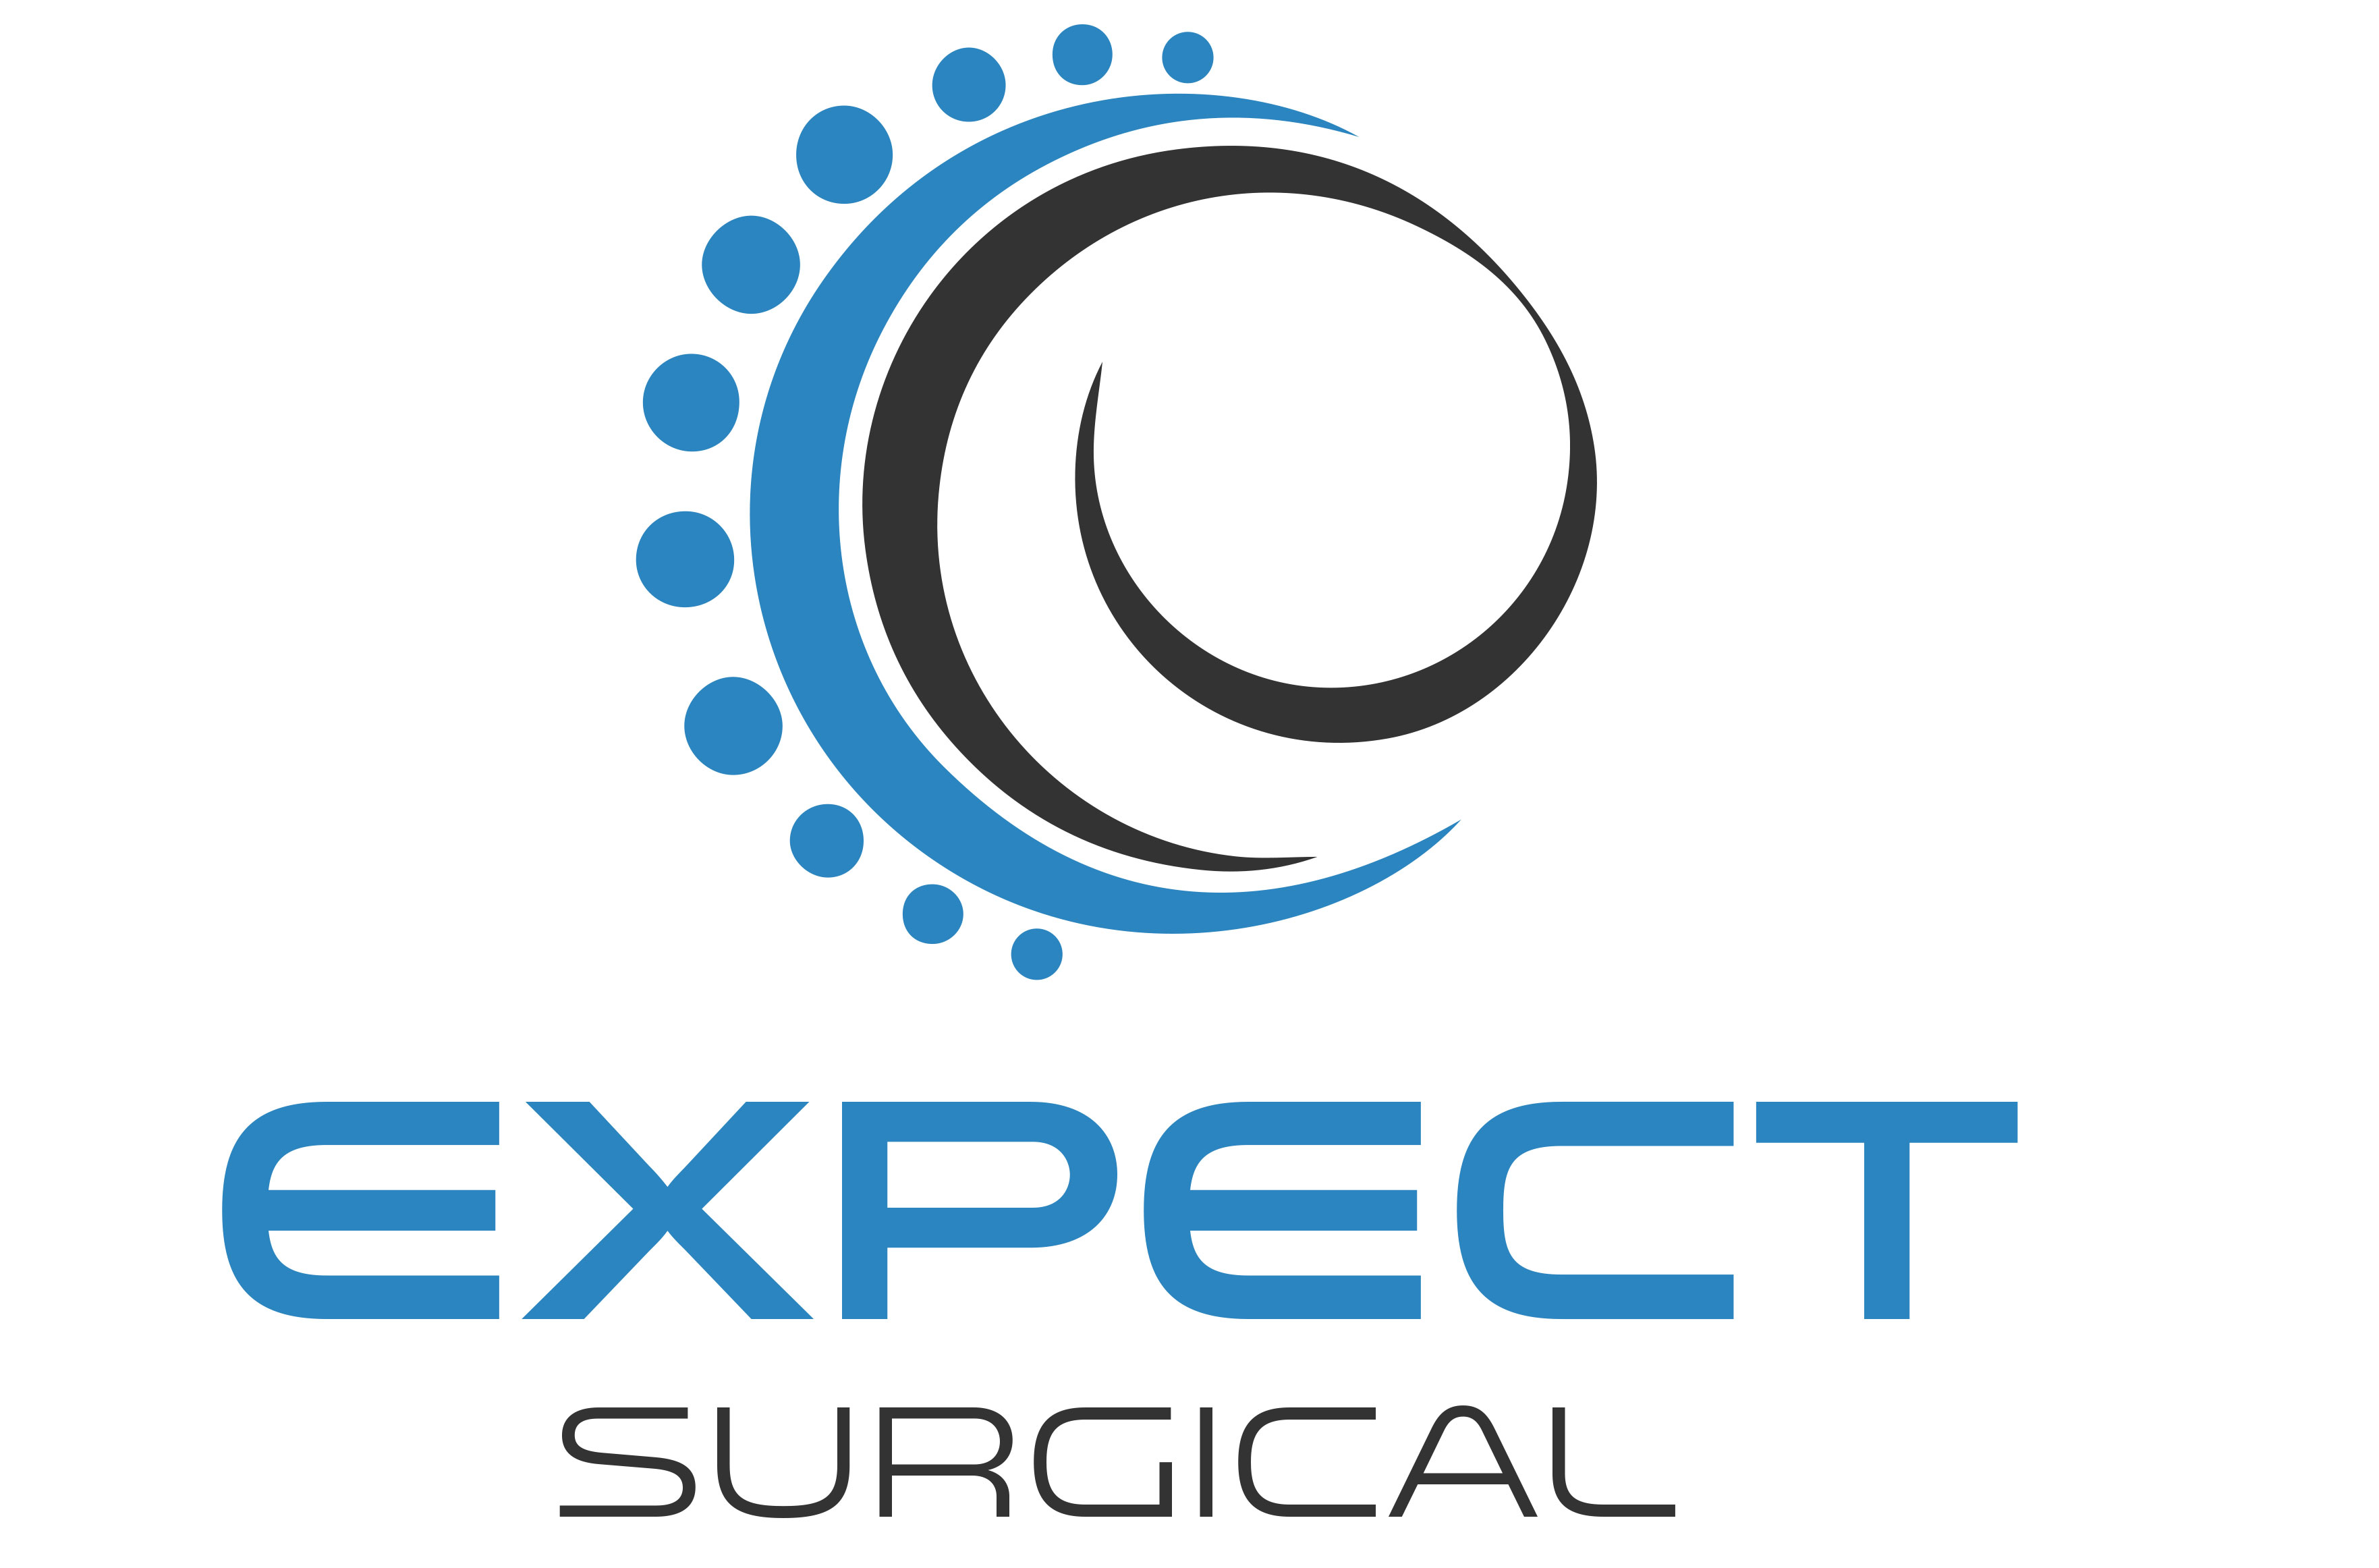 Expect Surgical